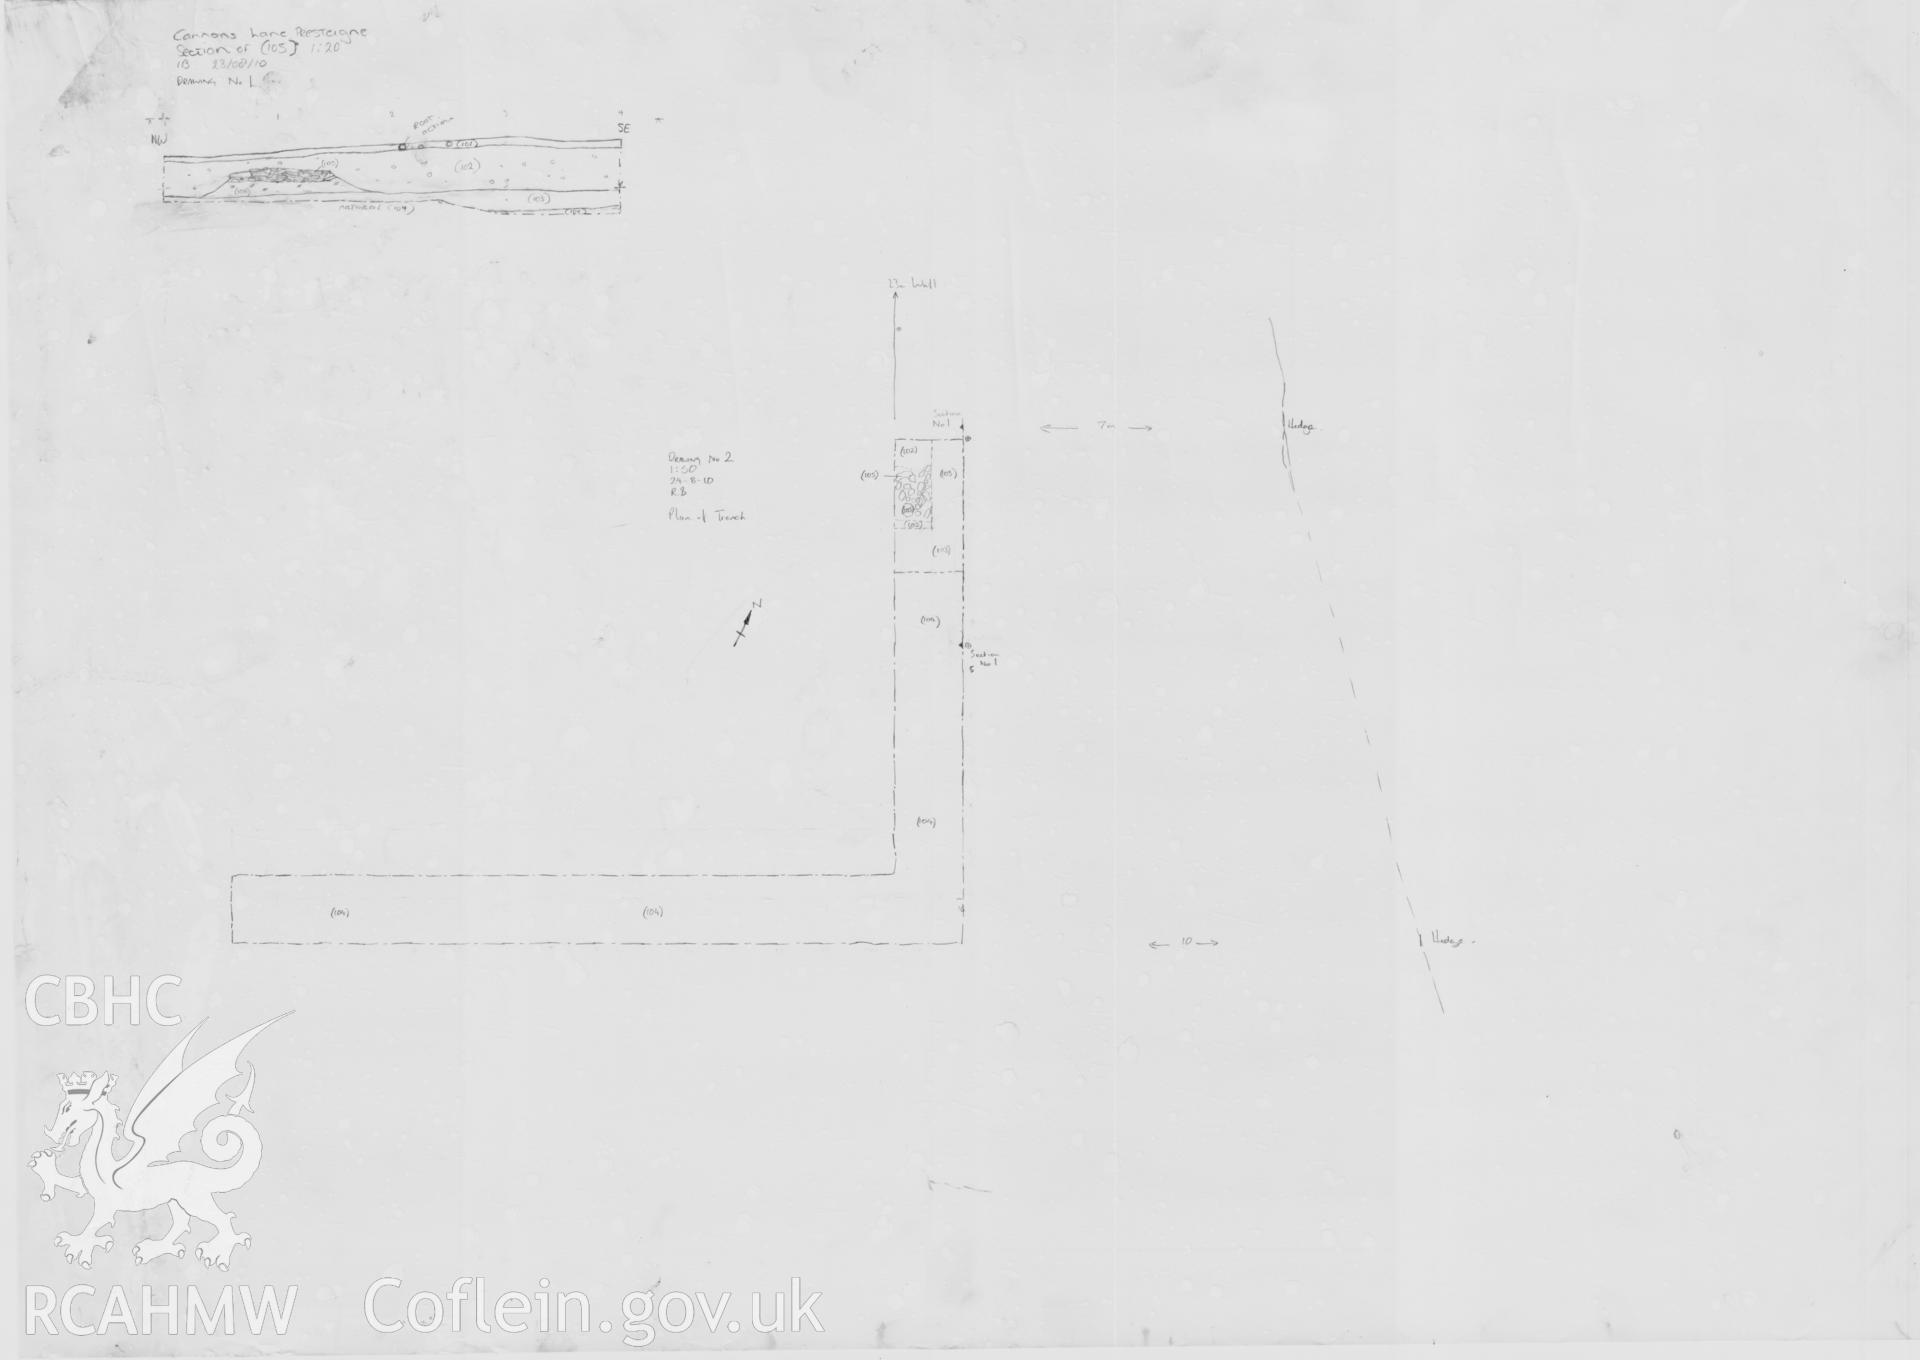 Digital photograph showing site plan, taken as part of Archaeological Watching Brief and Desk Based Assessment for the Old Bowling Green, Cannons Lane, Presteigne. CAP Report Number 653.